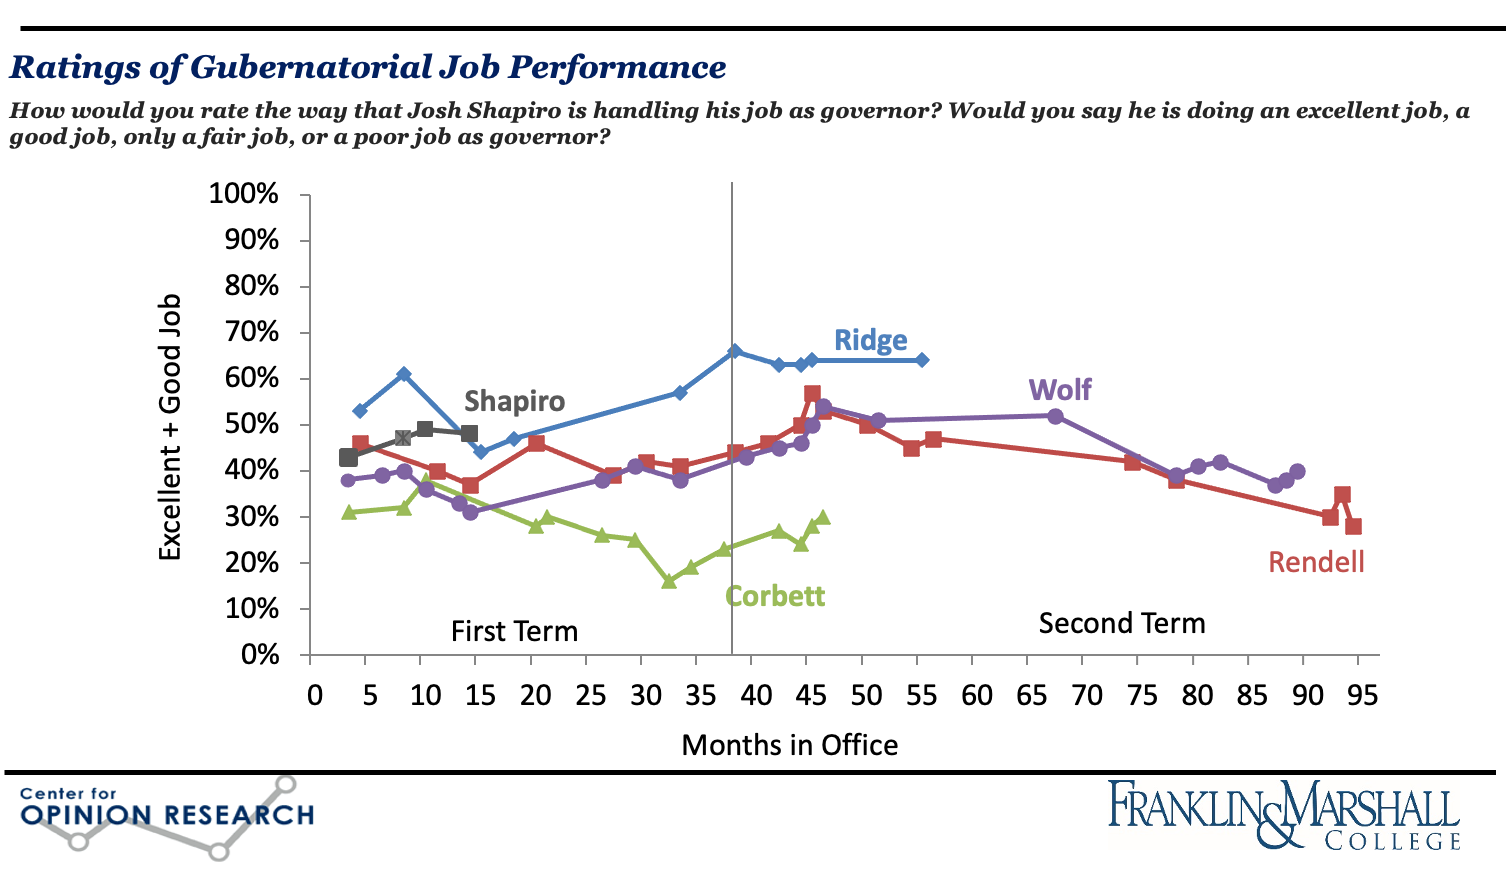 Figure 2. Line graph showing F&M Poll data on recent Pennsylvania governors' job approval ratings, January 1995 through February 2024. Governors included are Ridge, Rendell, Corbett, Wolf, and Shapiro.